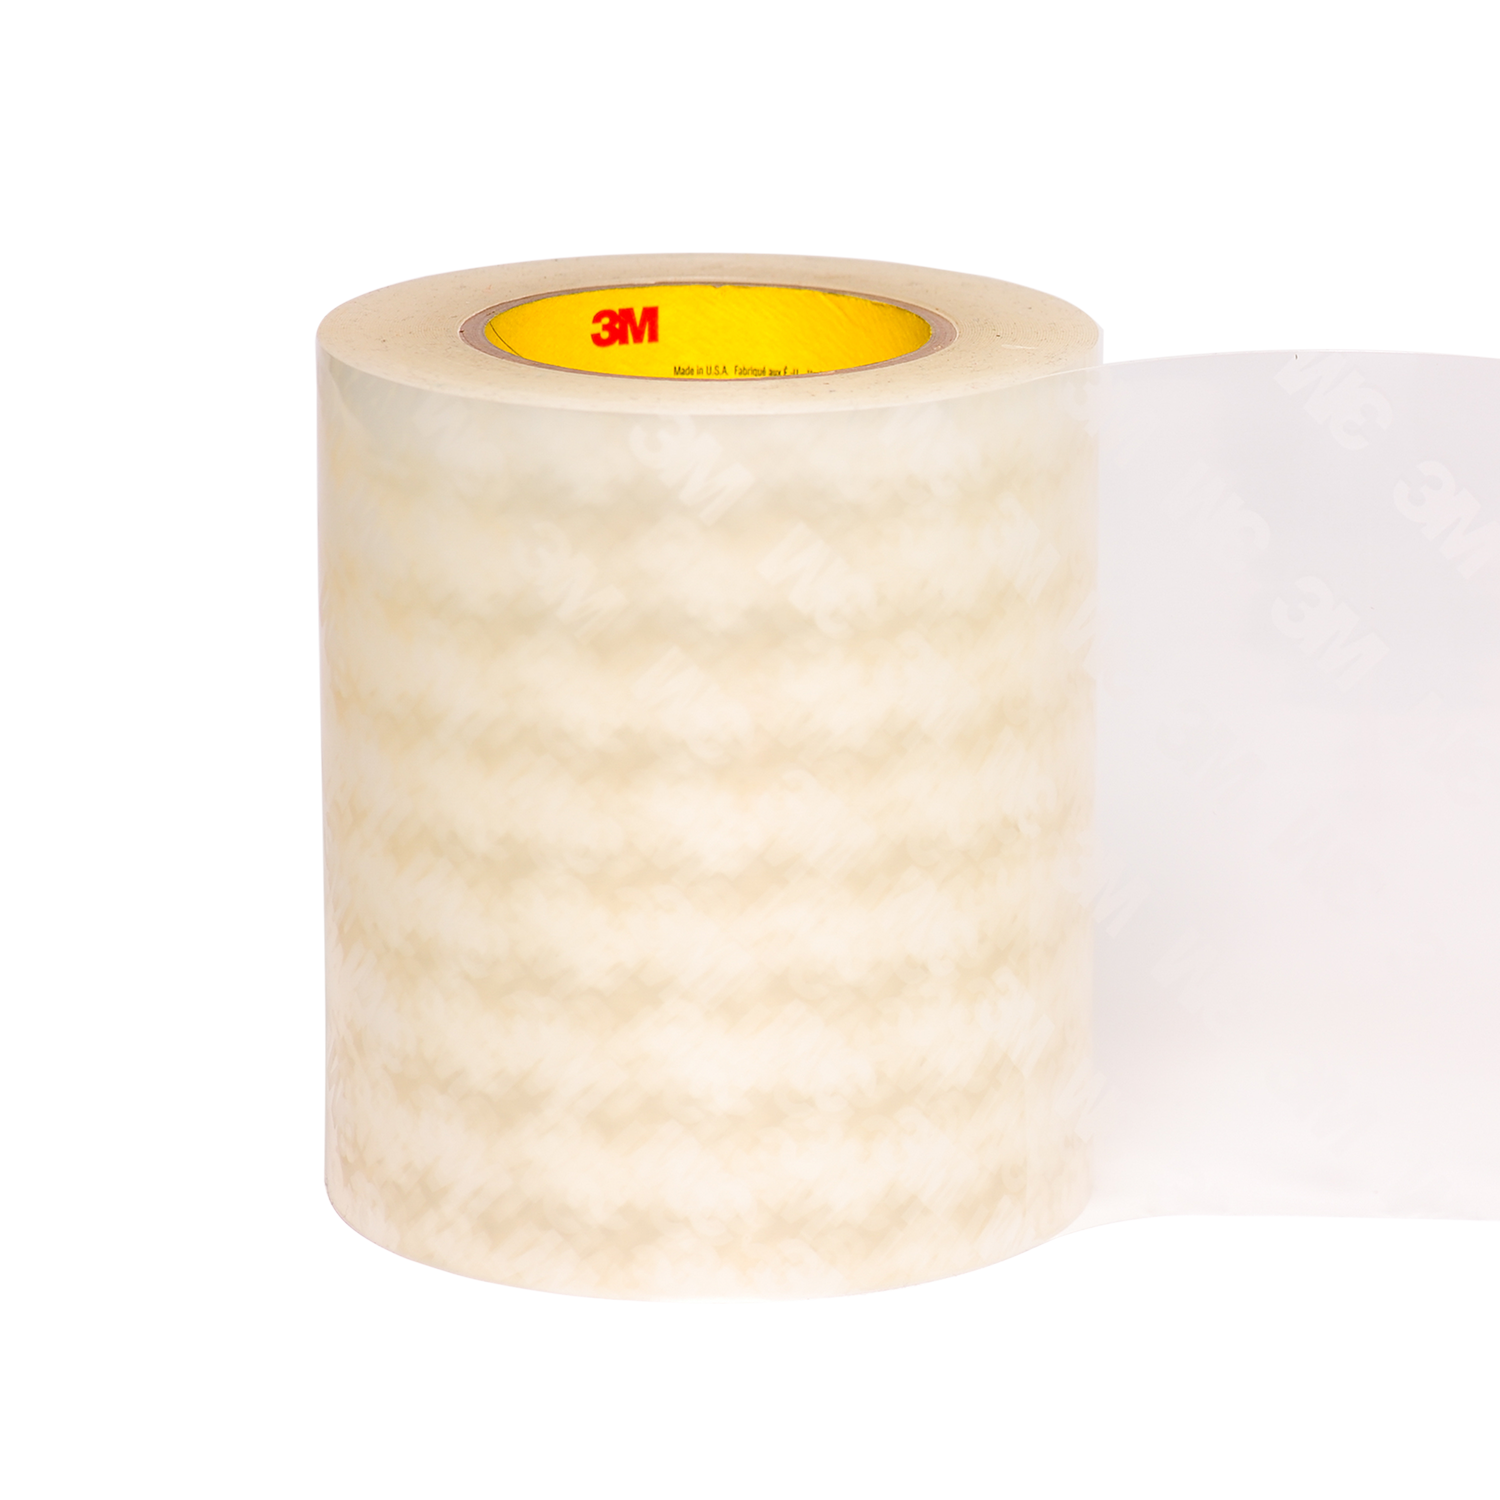 3M™ Polyurethane Protective Tape 8671HS Transparent 1 x 36 yards Roll 9